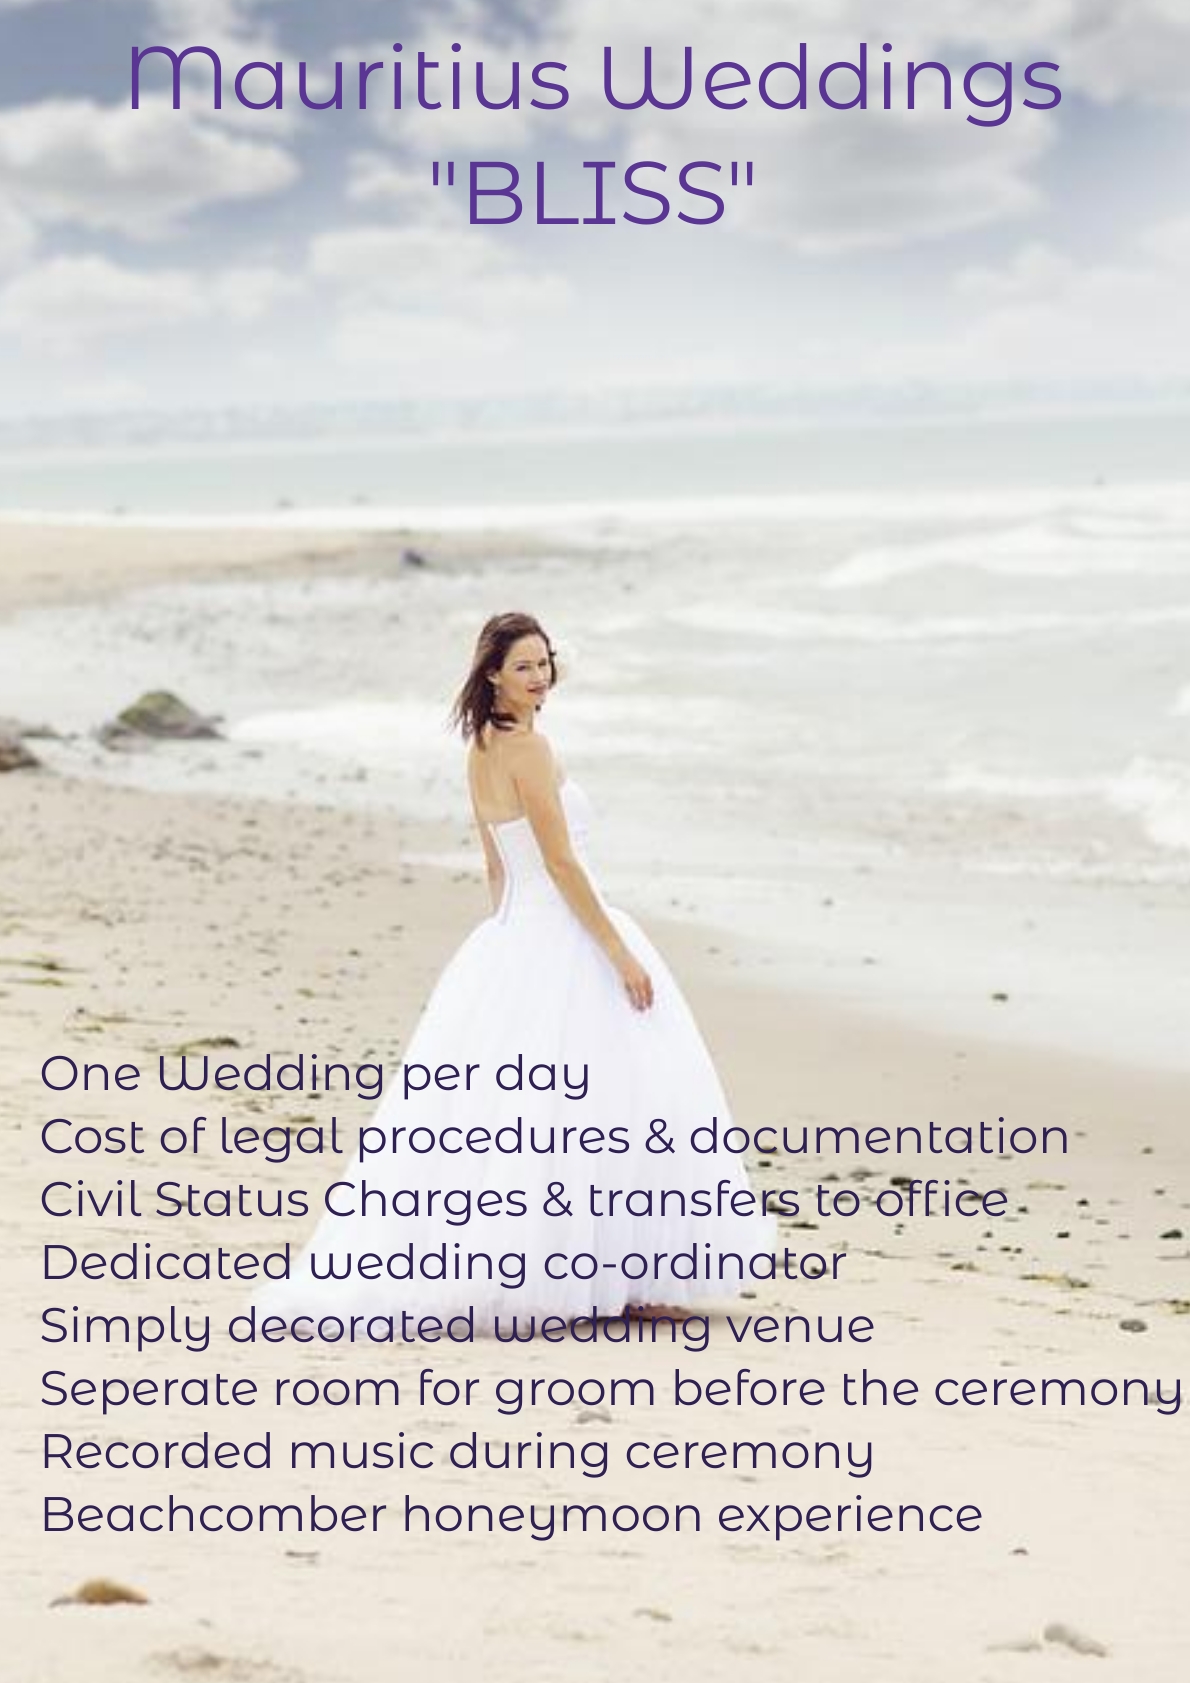 Beachcomber Wedding Packages in Mauritius